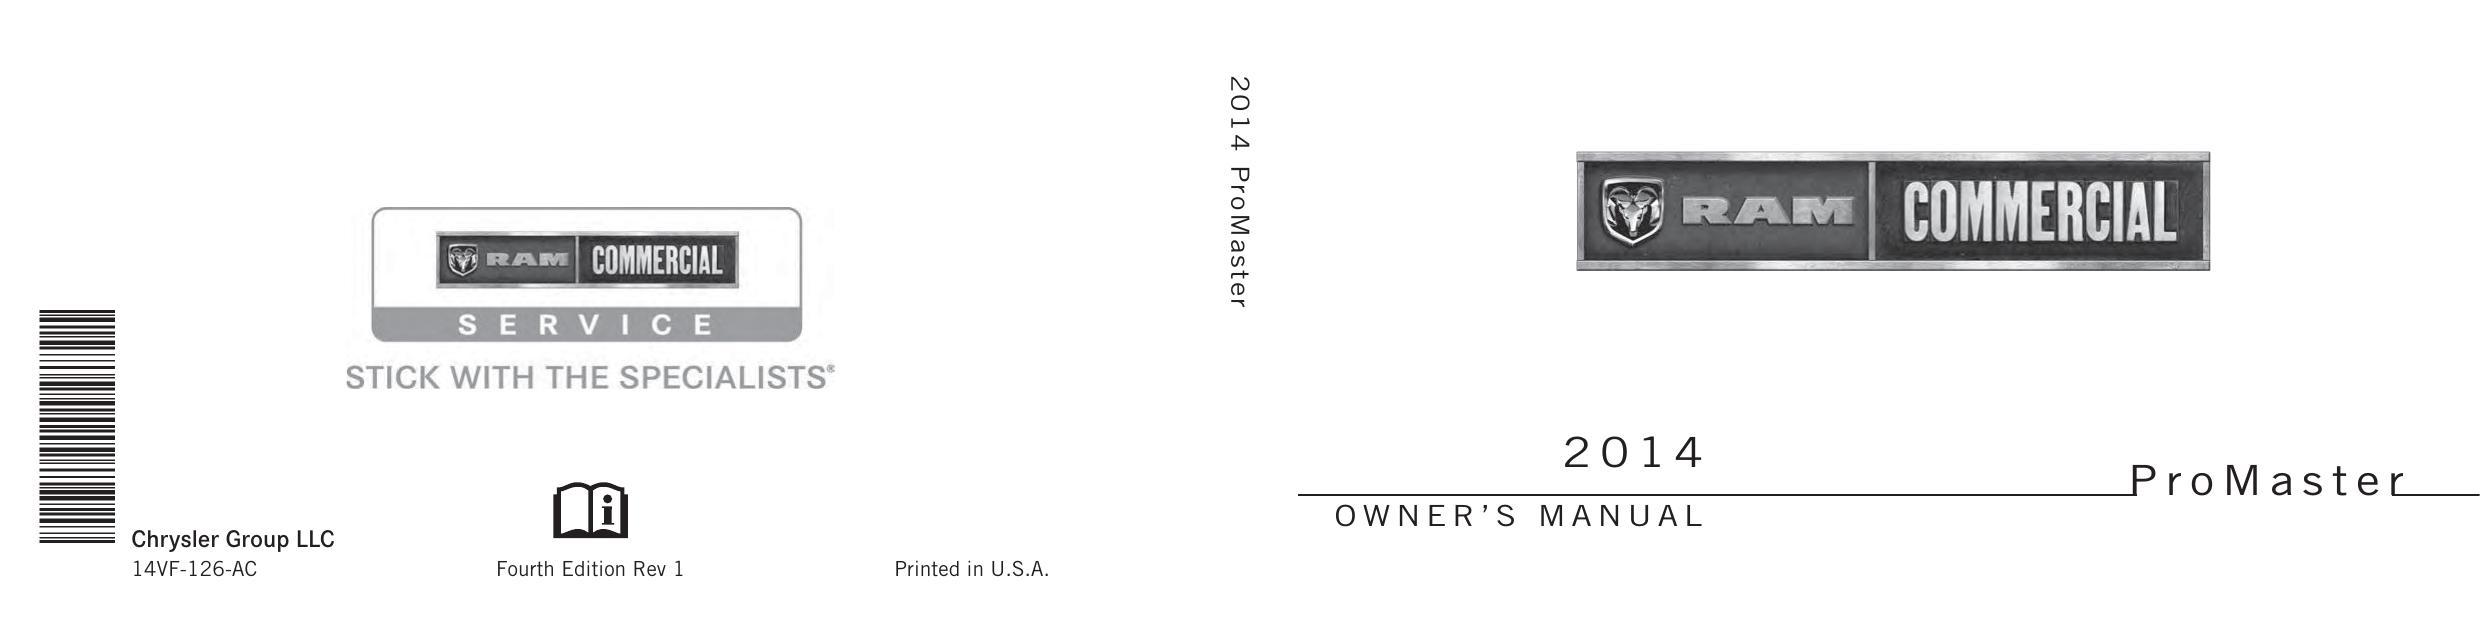 2014-ram-commercial-promaster-owners-manual.pdf